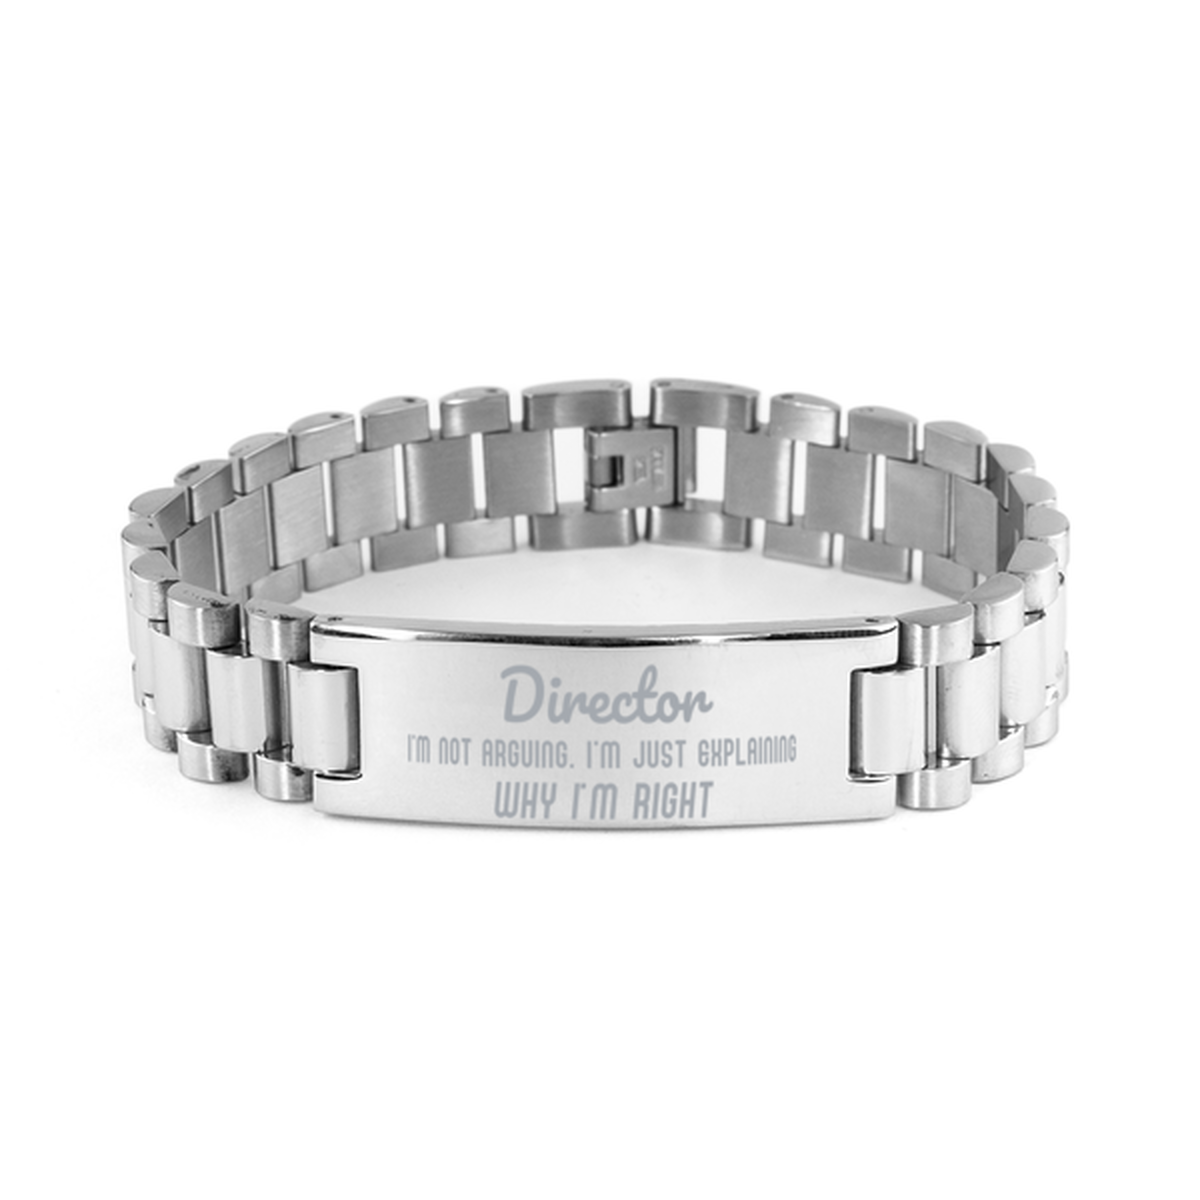 Director I'm not Arguing. I'm Just Explaining Why I'm RIGHT Ladder Stainless Steel Bracelet, Graduation Birthday Christmas Director Gifts For Director Funny Saying Quote Present for Men Women Coworker